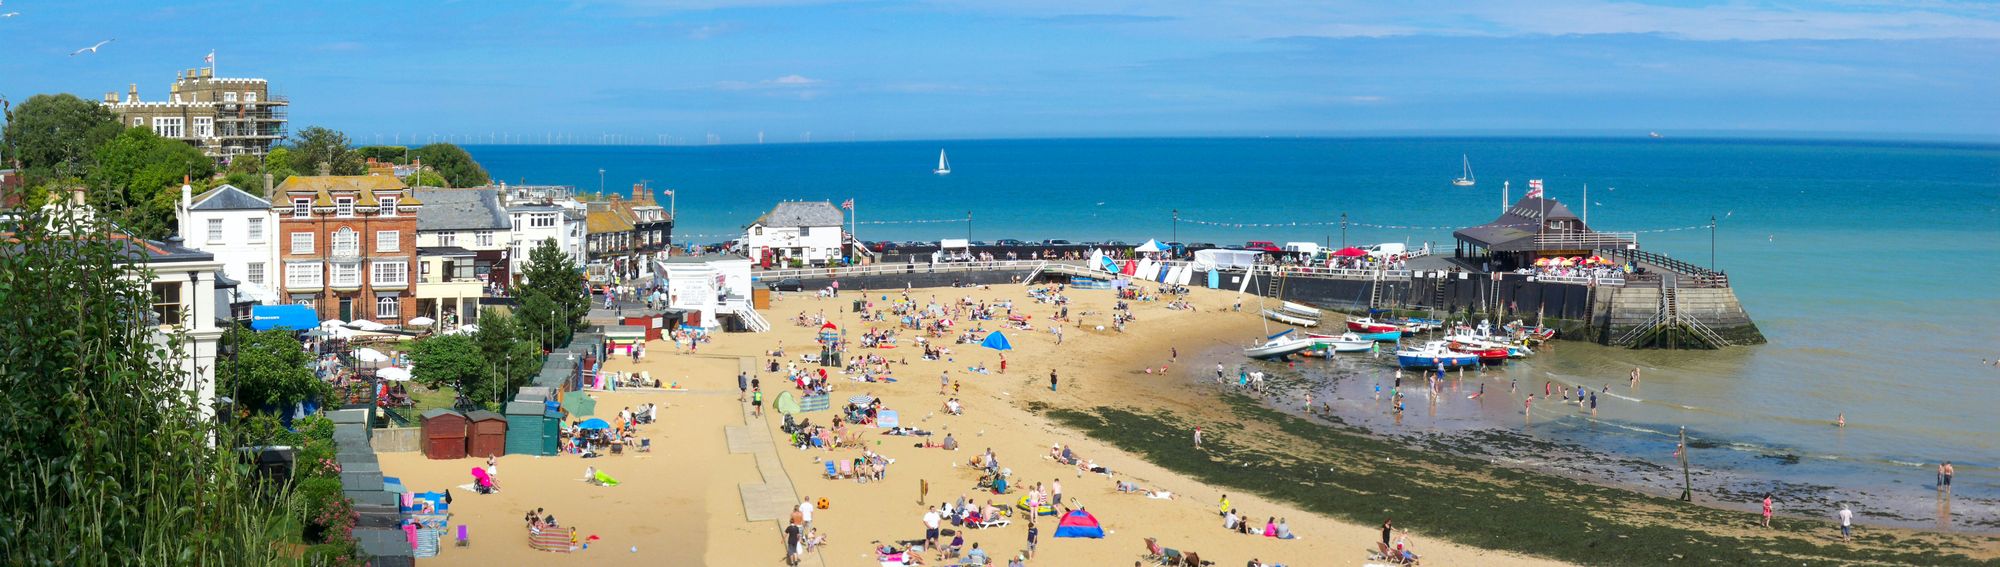 Broadstairs Holiday Cottages